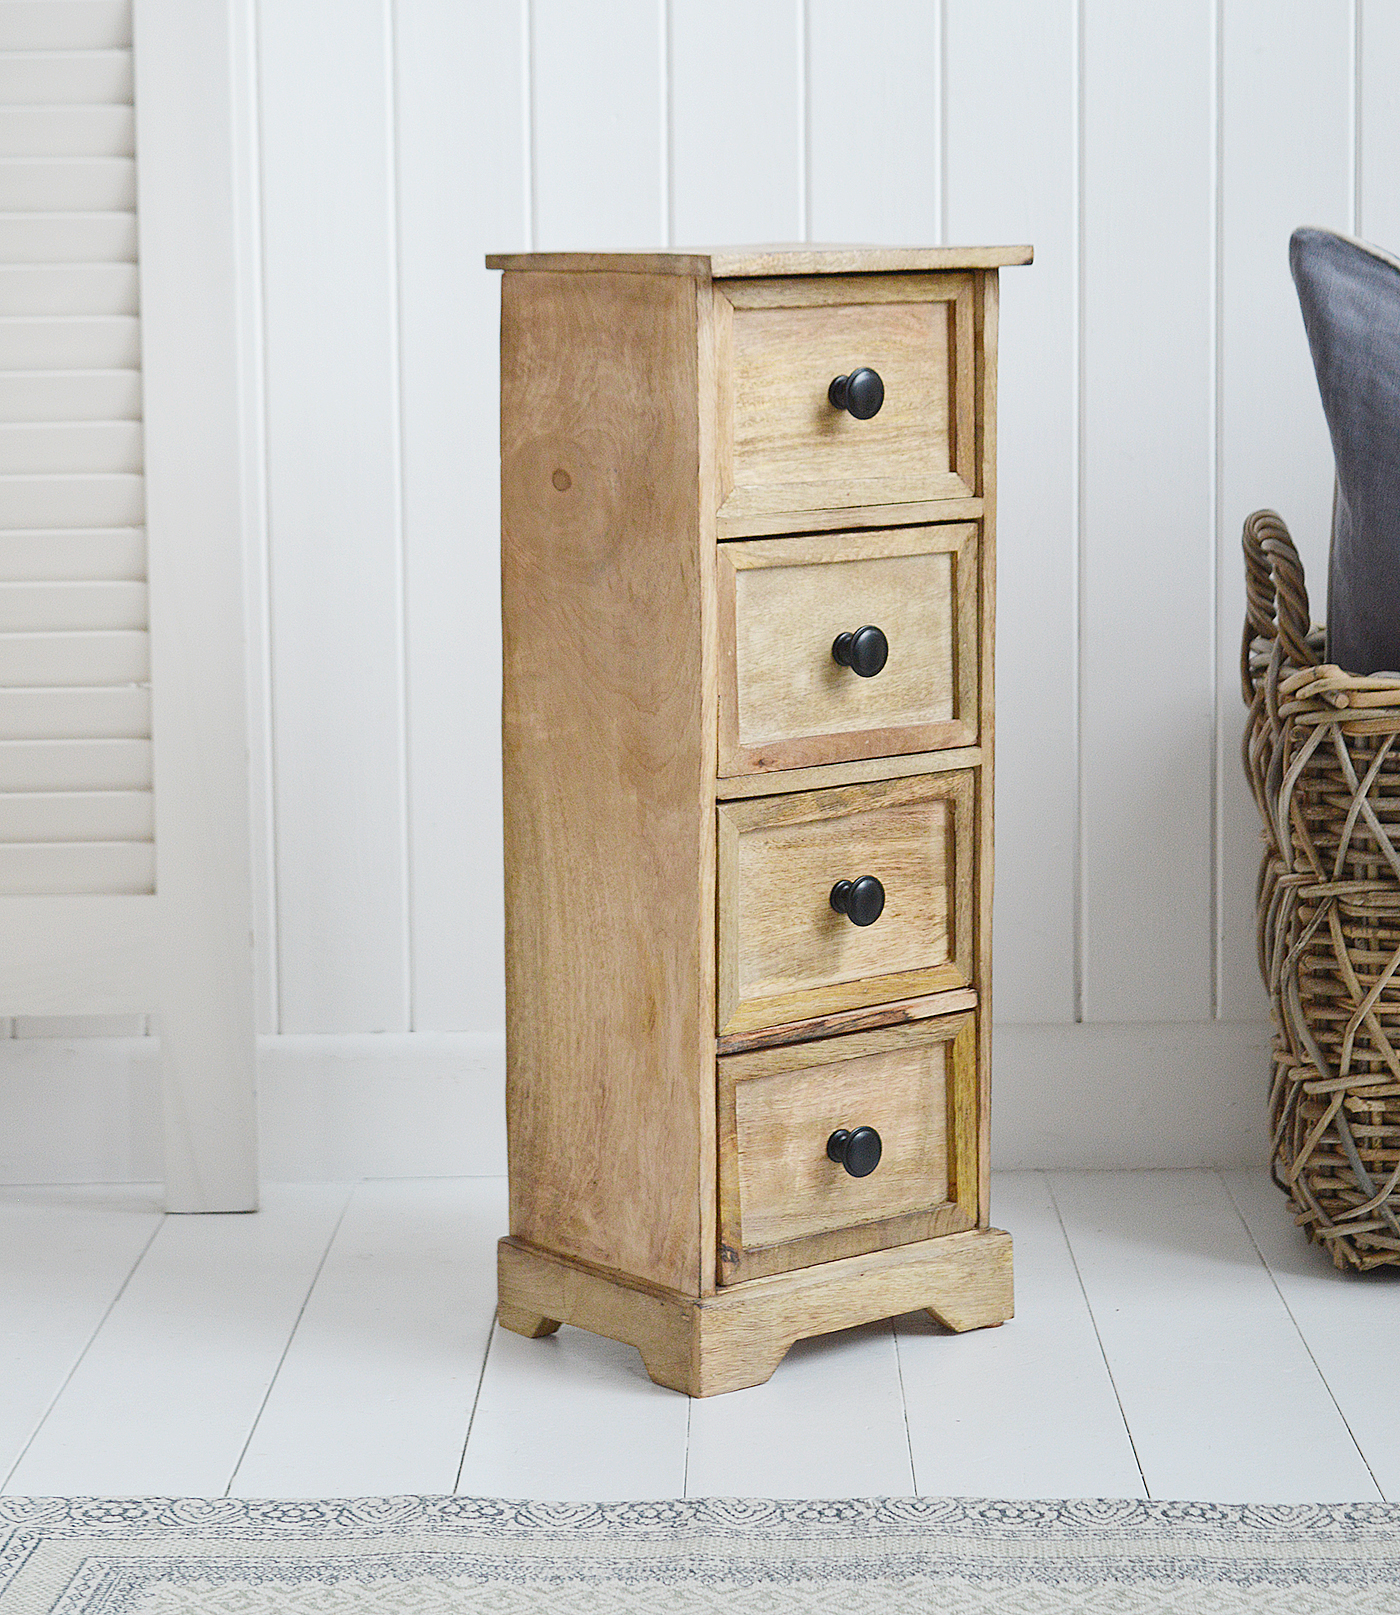 Dorset narrow bedside cabinets with drawers. Solid wood